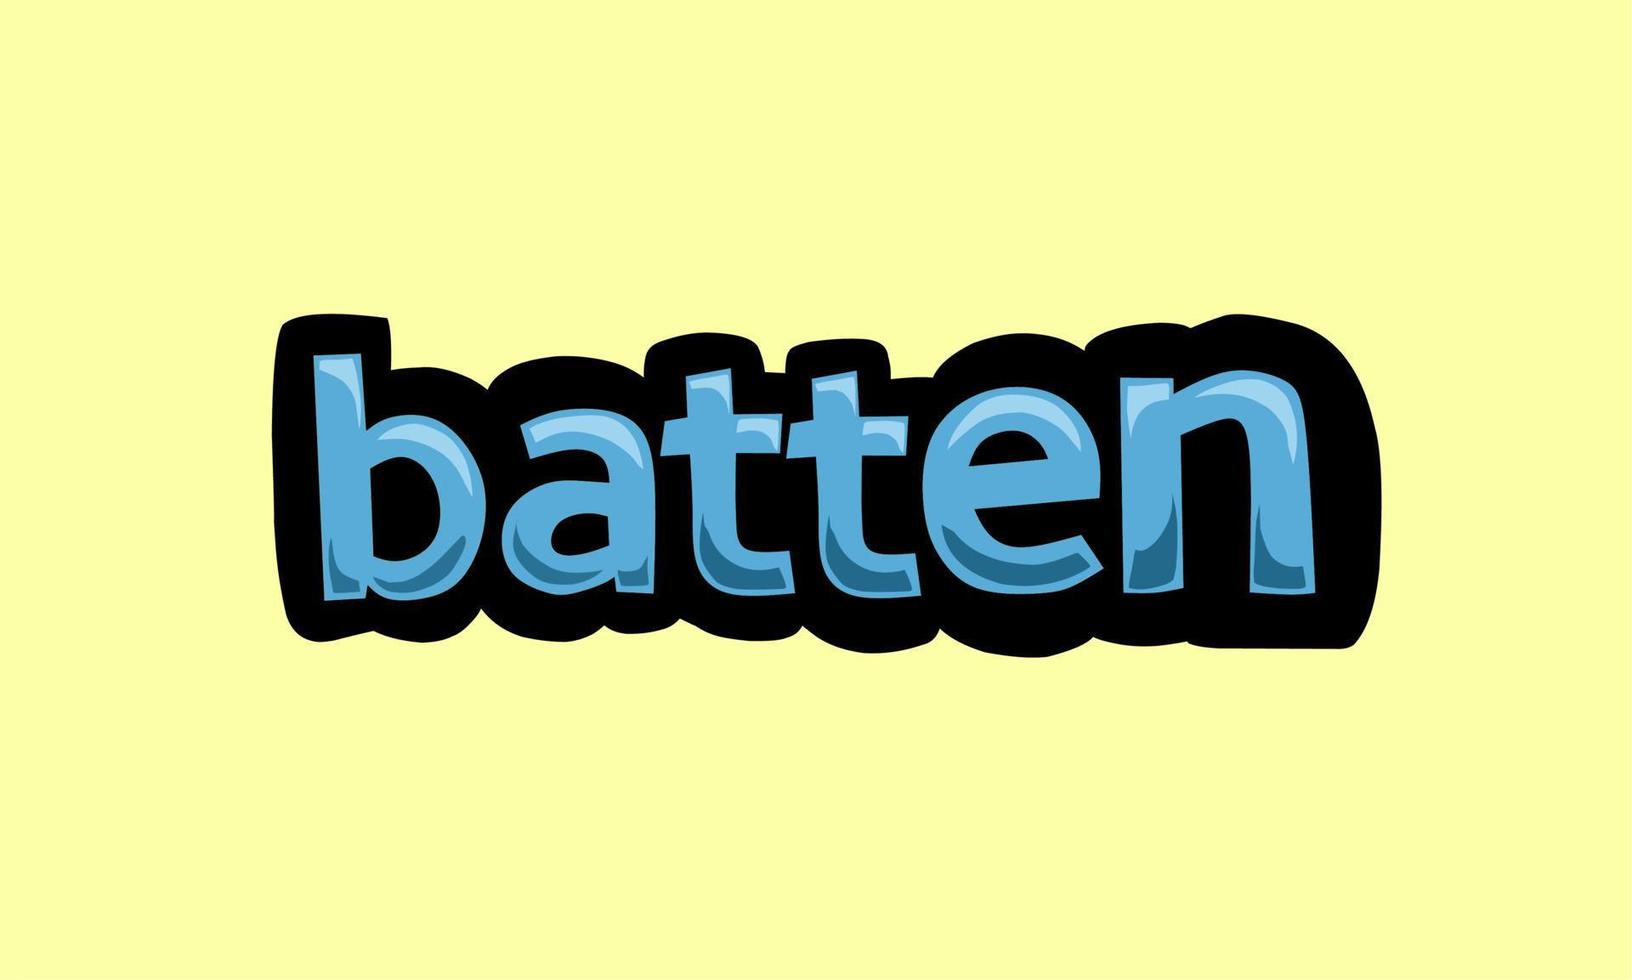 batten writing vector design on a yellow background